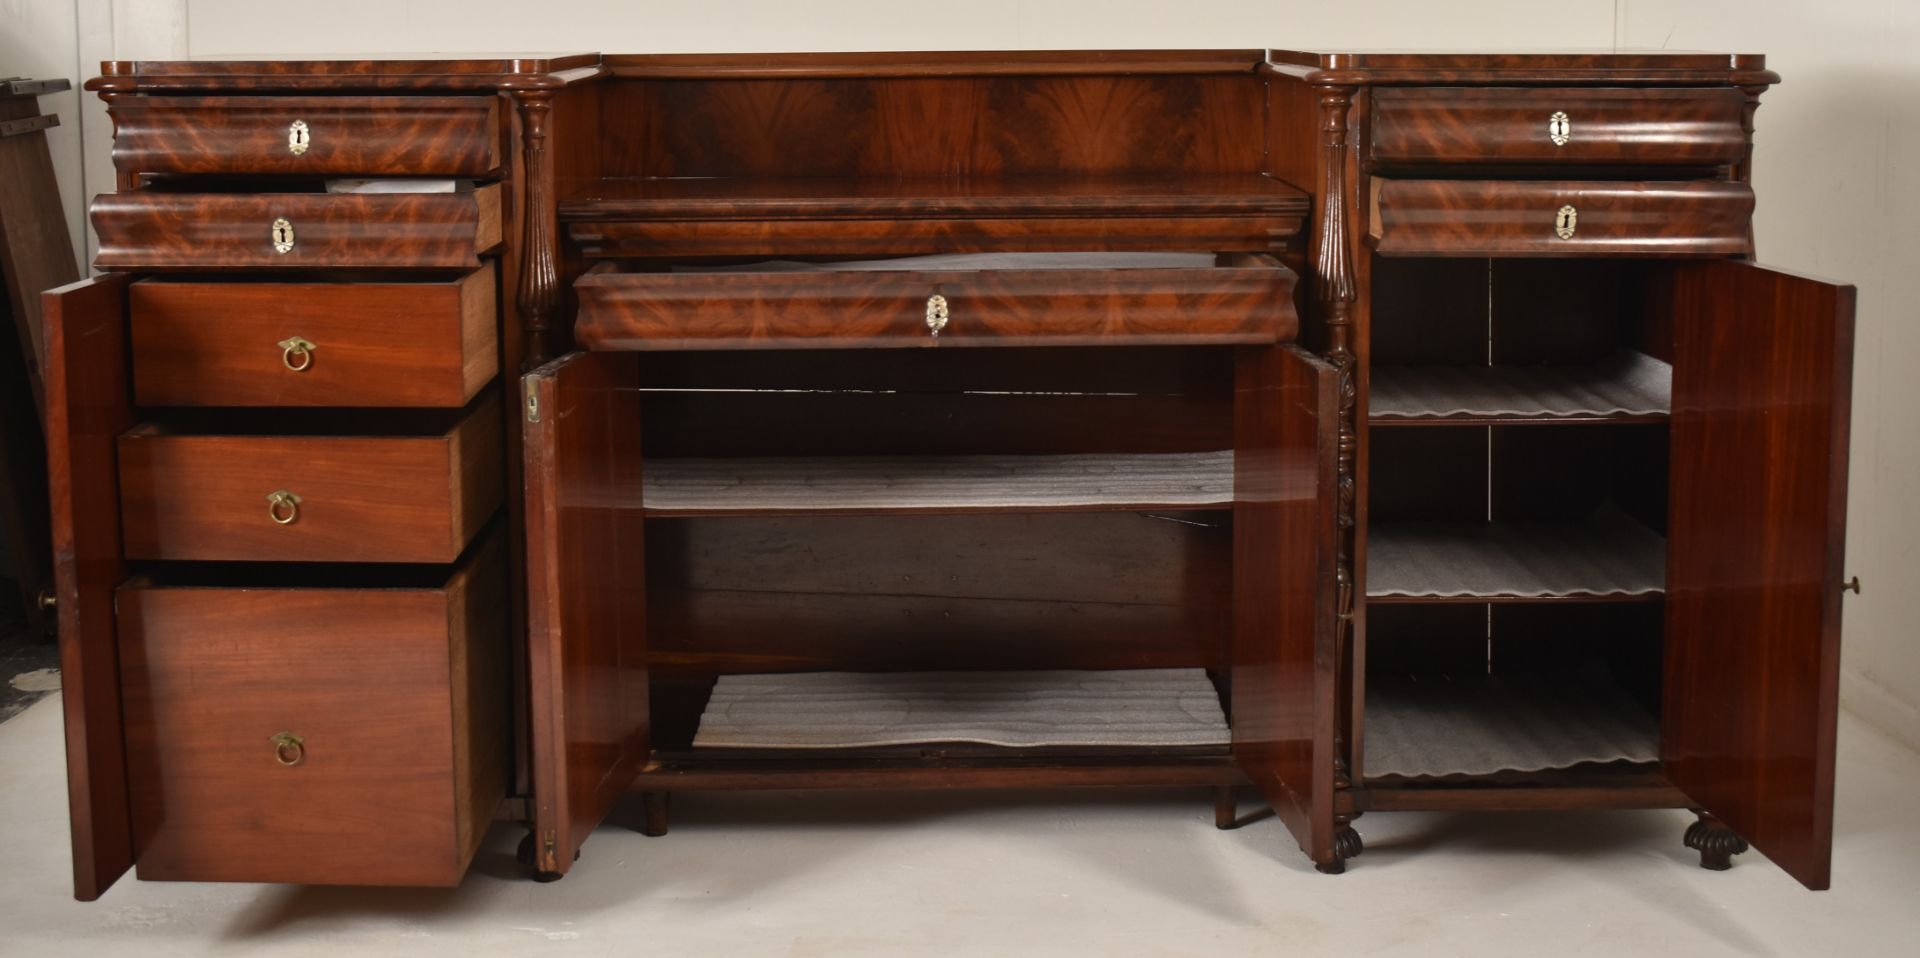 19TH CENTURY VICTORIAN INVERTED BREAKFRONT SIDEBOARD - Image 6 of 12